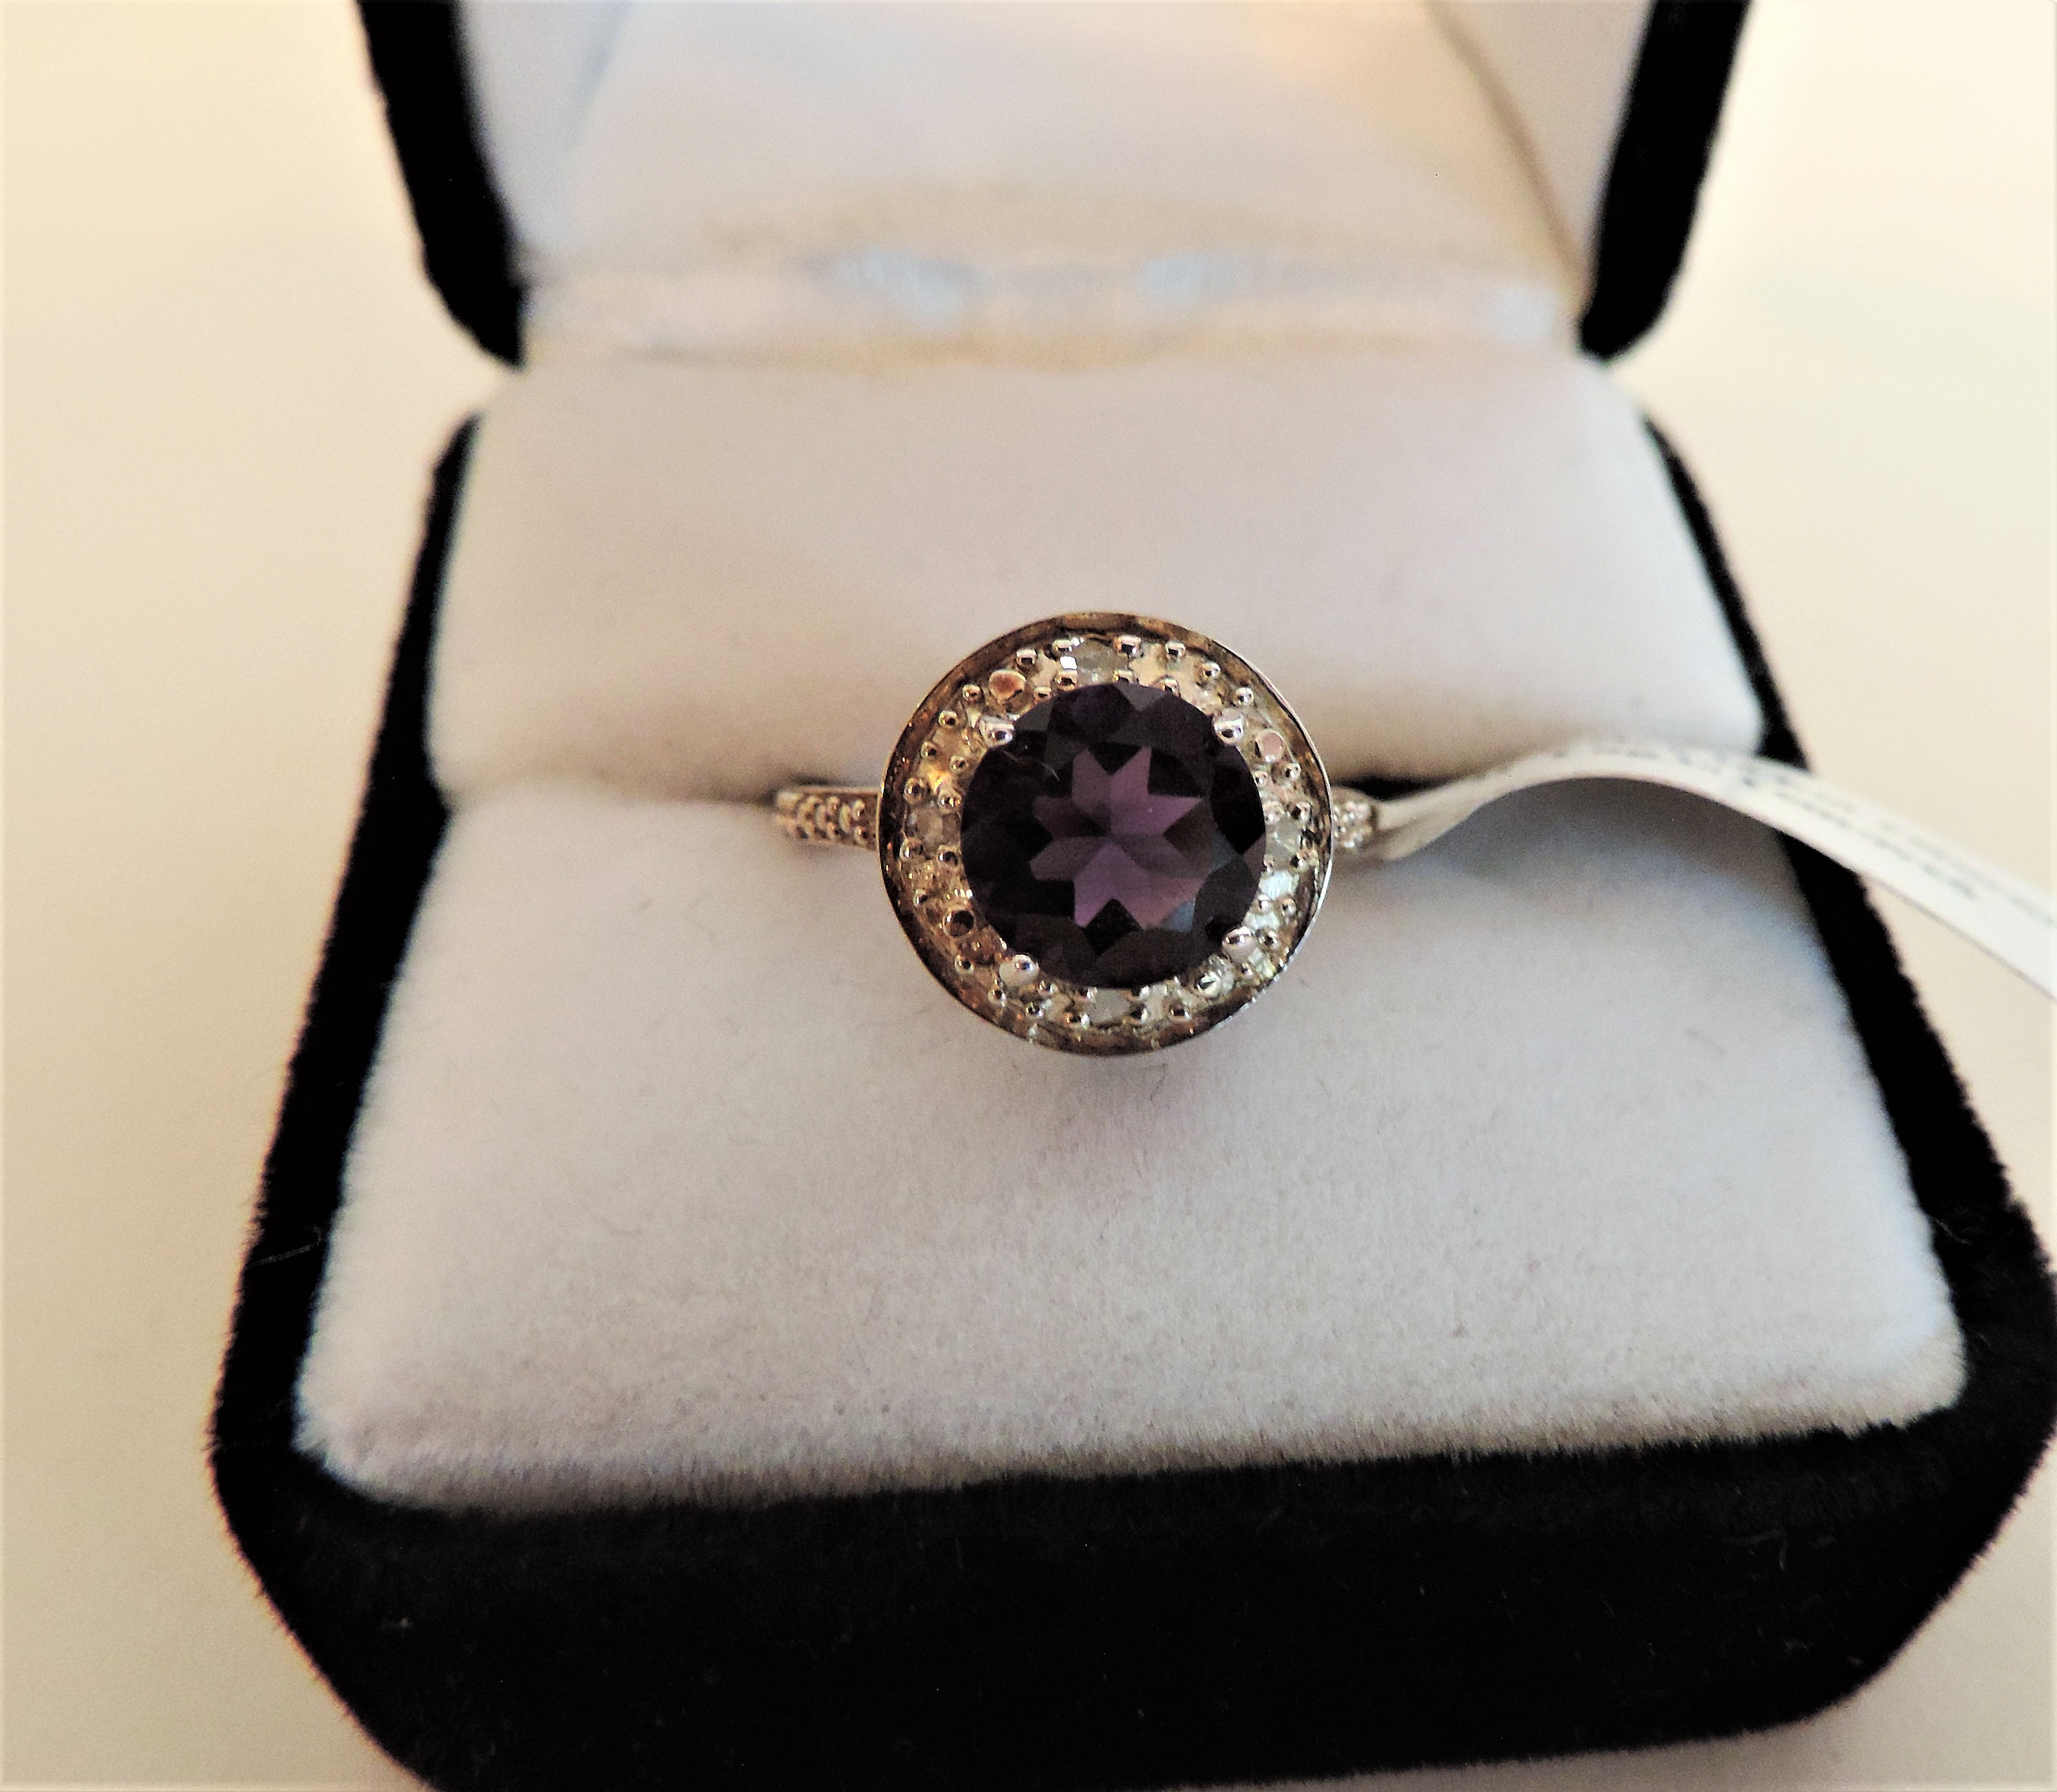 Sterling Silver 1.3 carat Amethyst Ring - Image 2 of 4